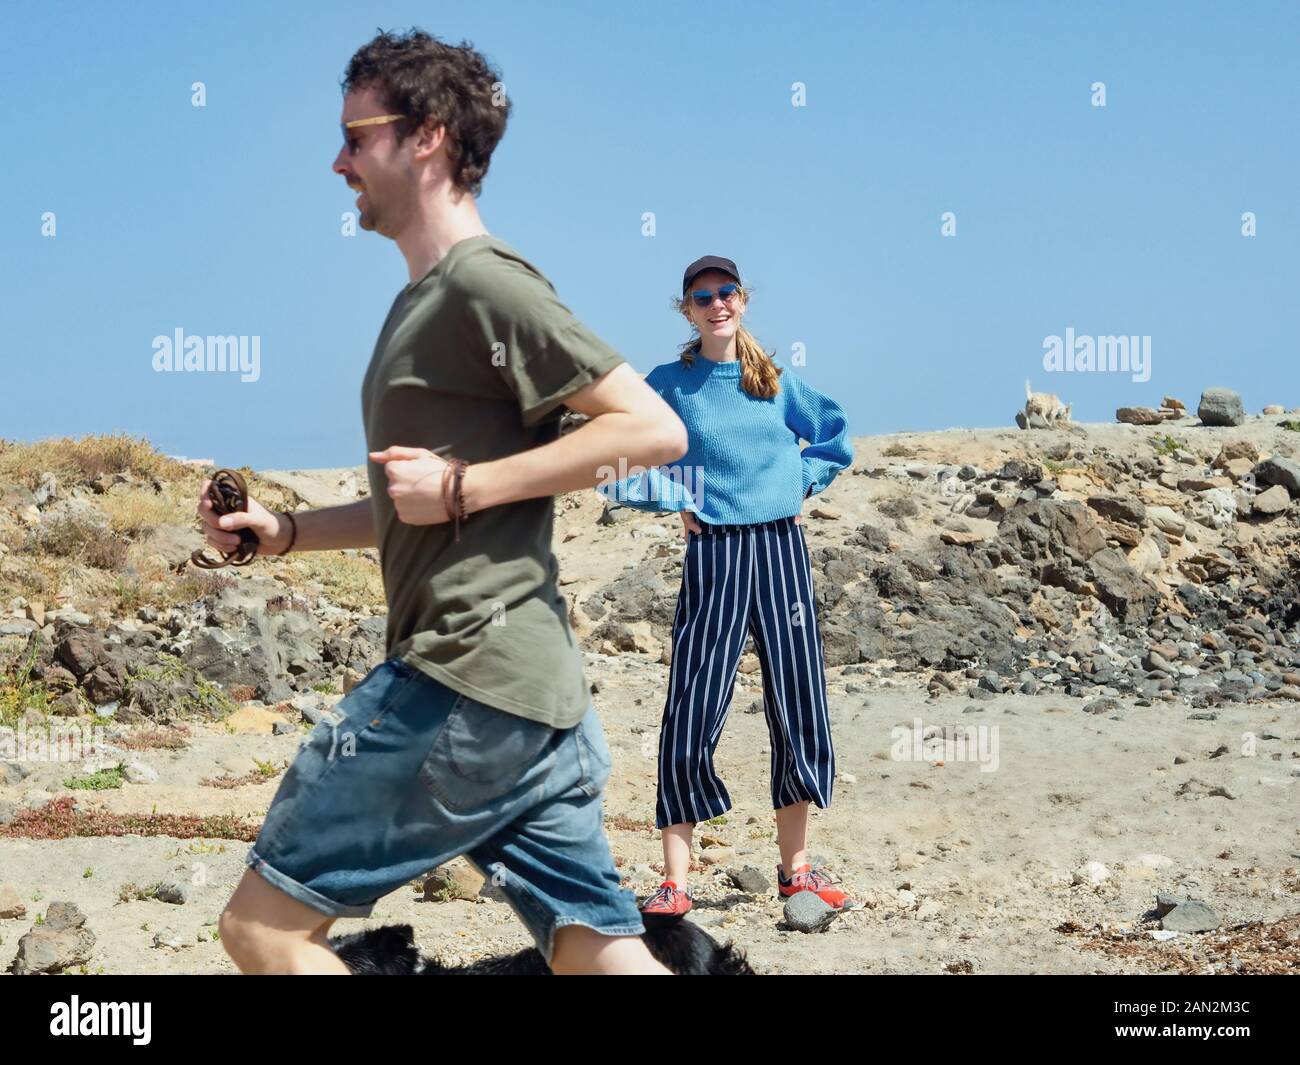 A laughing young woman with a black cap watches her boyfriend who has started a race with her dog. The young man runs past her. Very blue sky and sunn Stock Photo